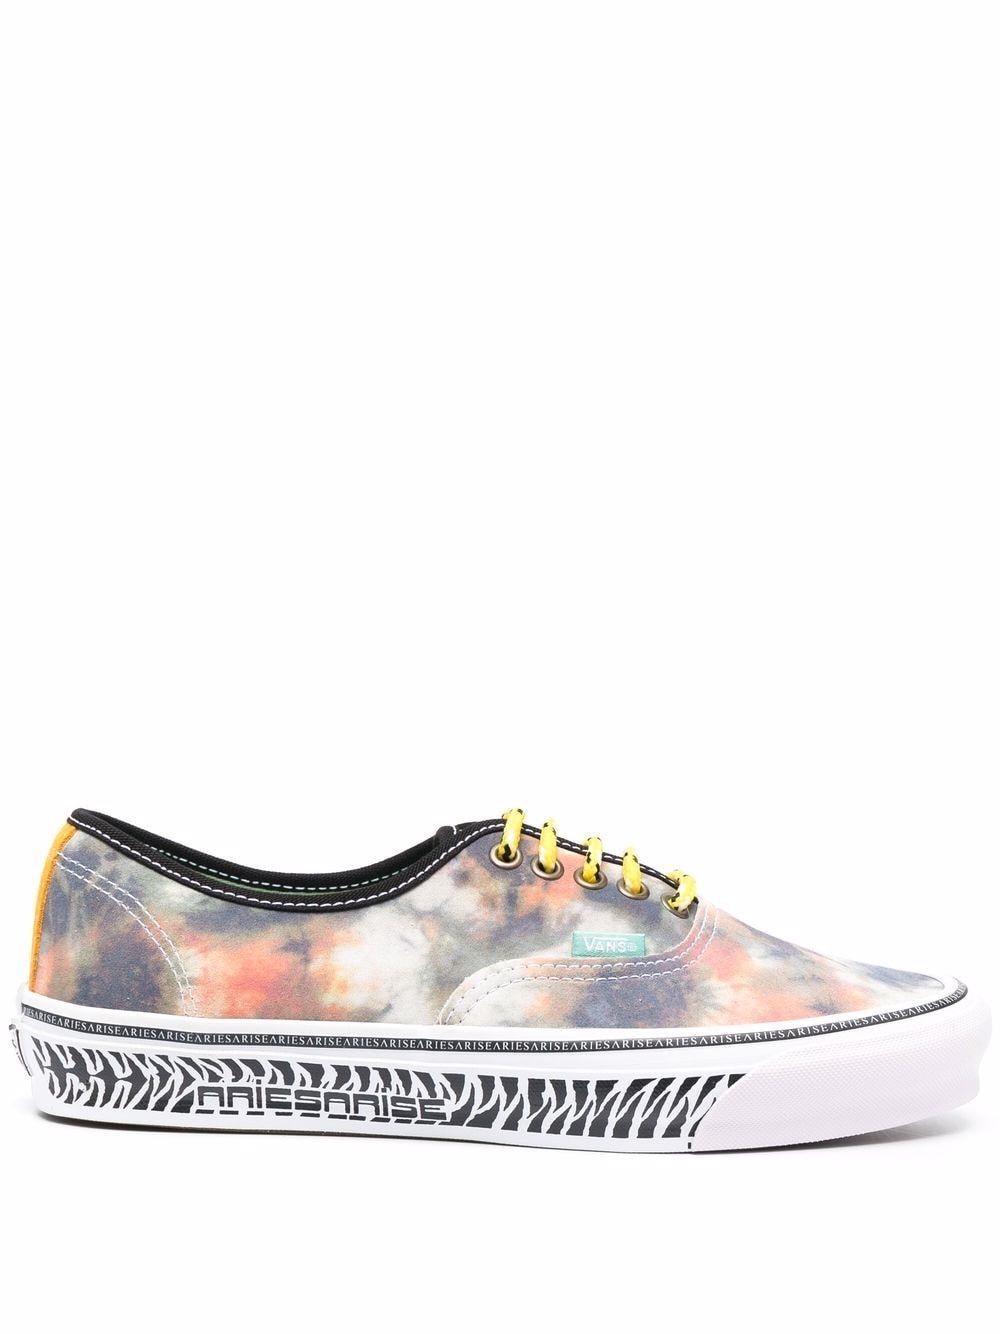 Aries X Vans 男士运动鞋印花 Vn0a4bv9yzc1authentic In Multi